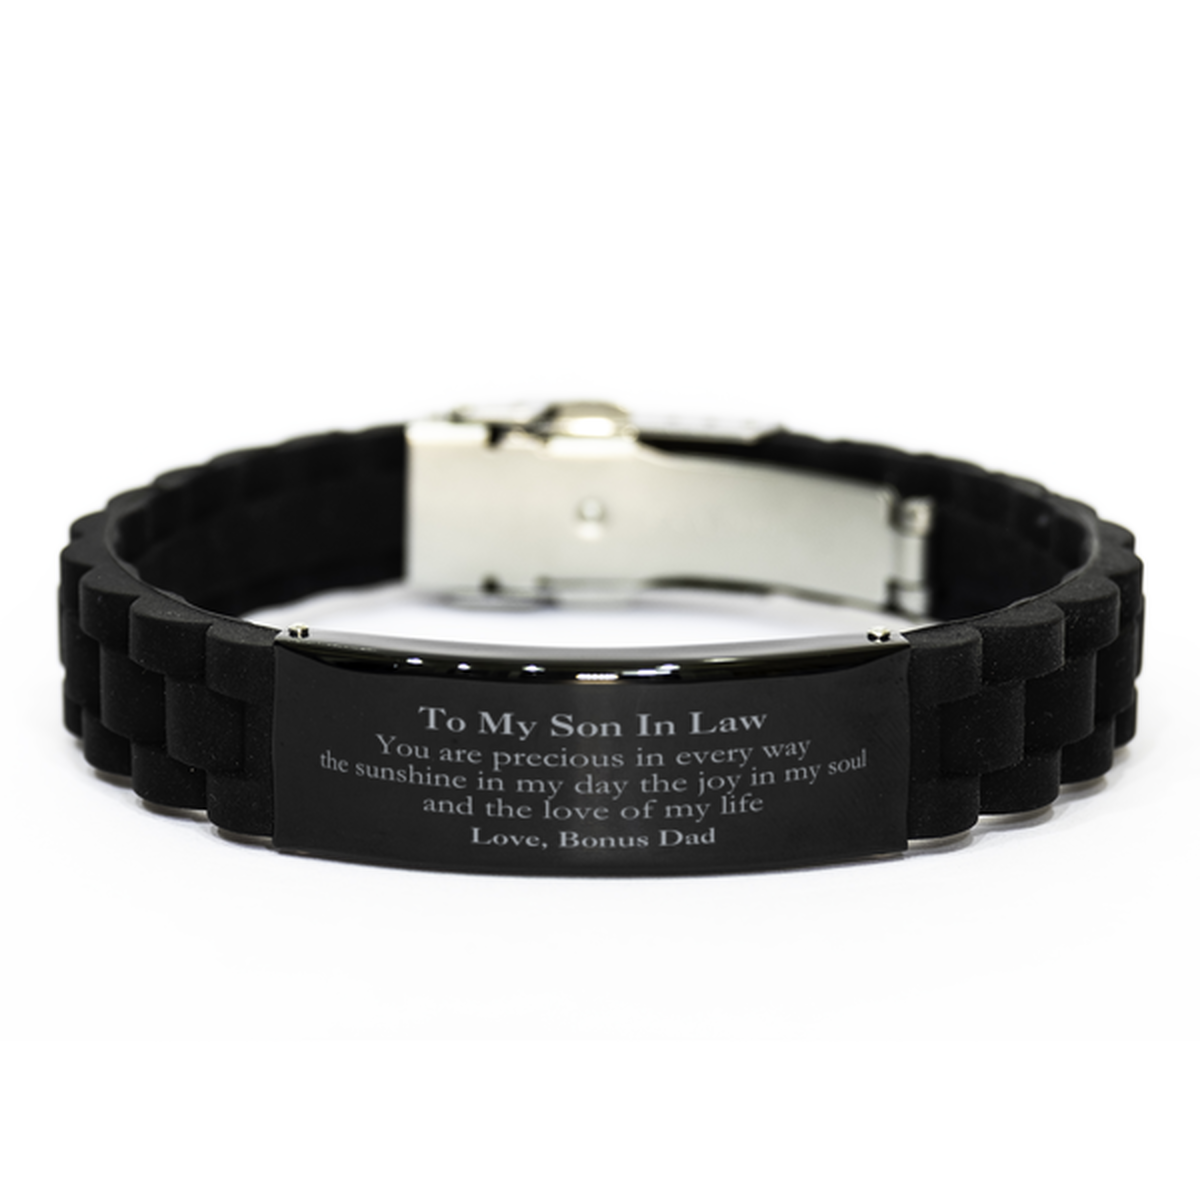 Graduation Gifts for Son In Law Black Glidelock Clasp Bracelet Present from Bonus Dad, Christmas Son In Law Birthday Gifts Son In Law You are precious in every way the sunshine in my day. Love, Bonus Dad